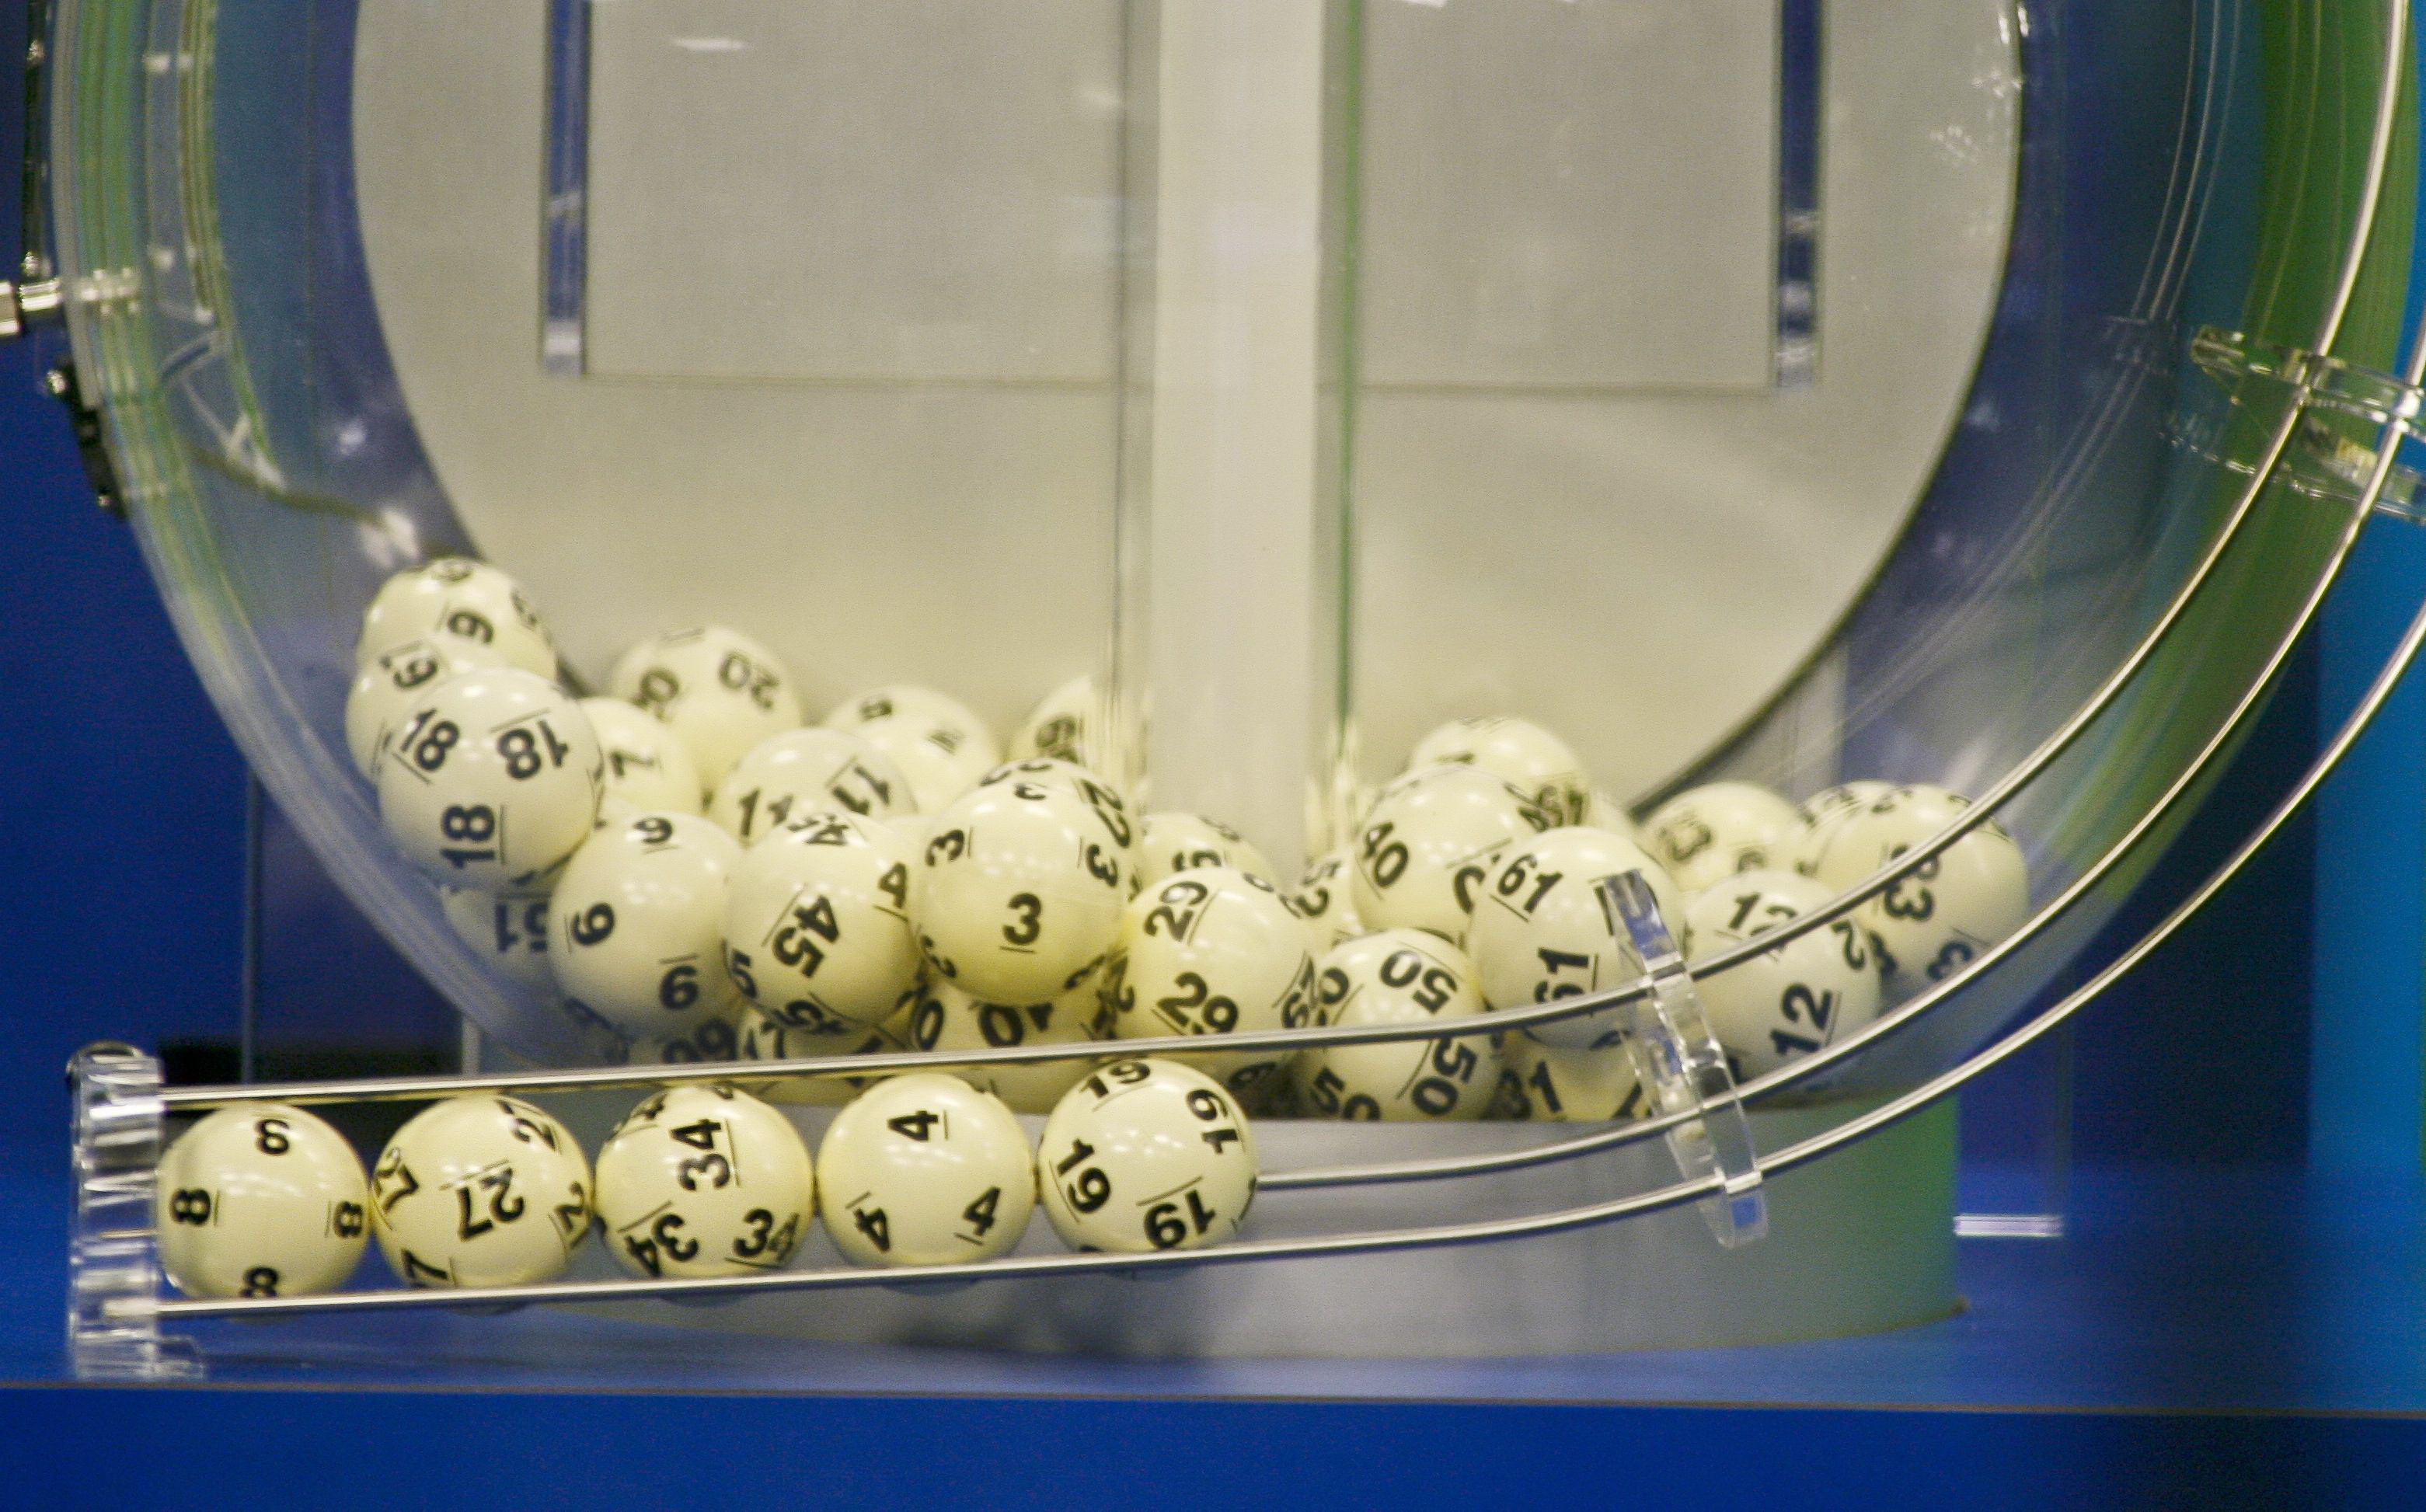 California lottery says it has a winner in $1.6 bln Powerball jackpot